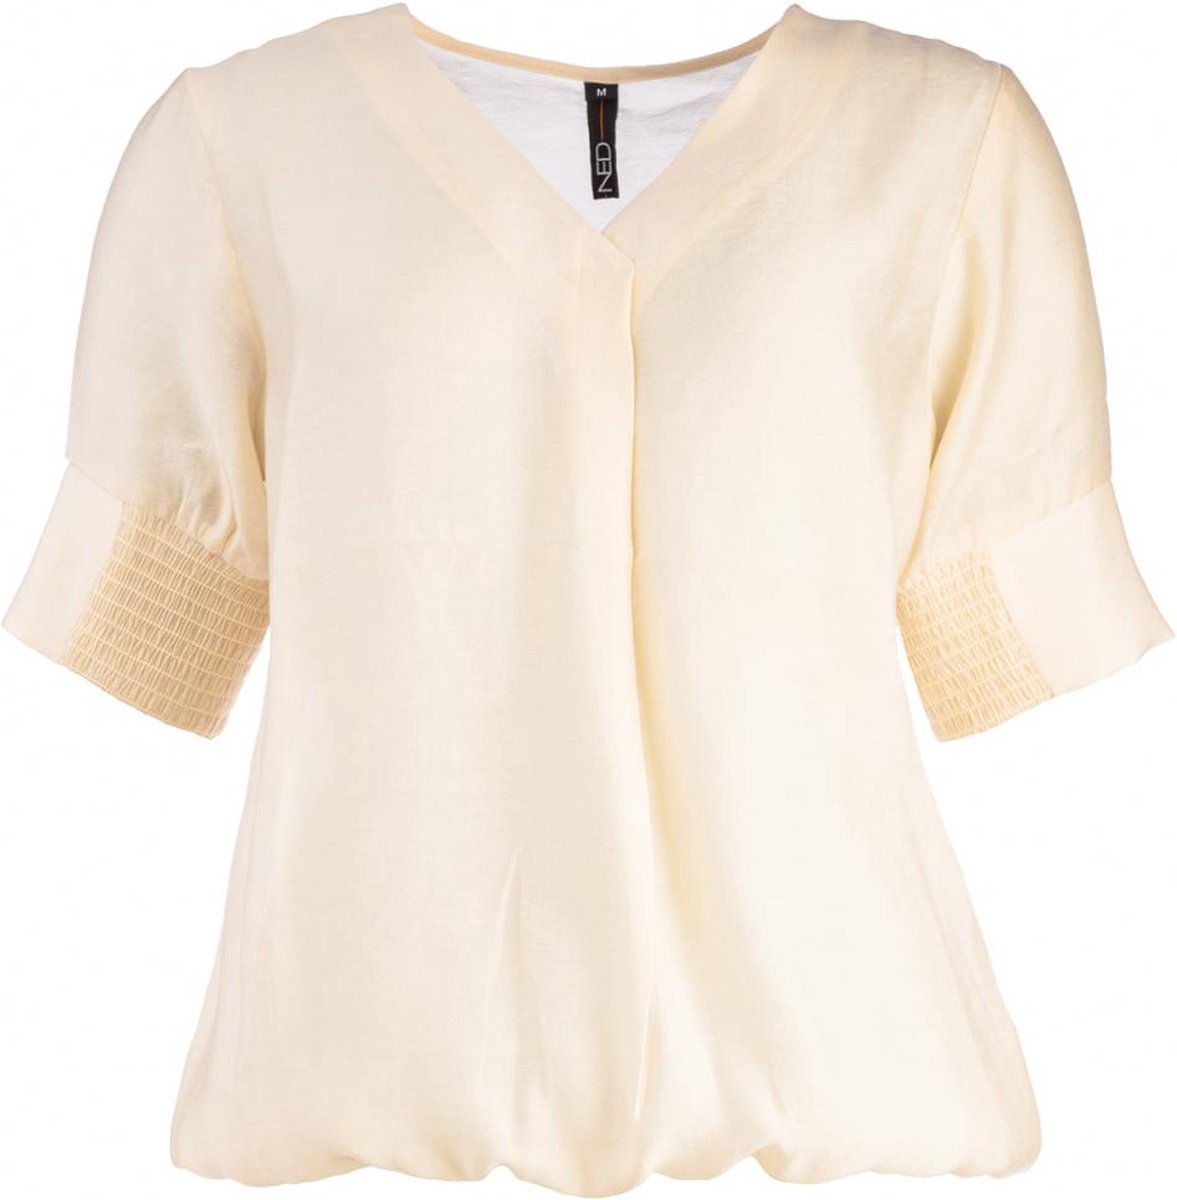 NED Blouse Ralon 1 2 Ss 23s1 U184 04 625 Bleached Sand Dames Maat - M